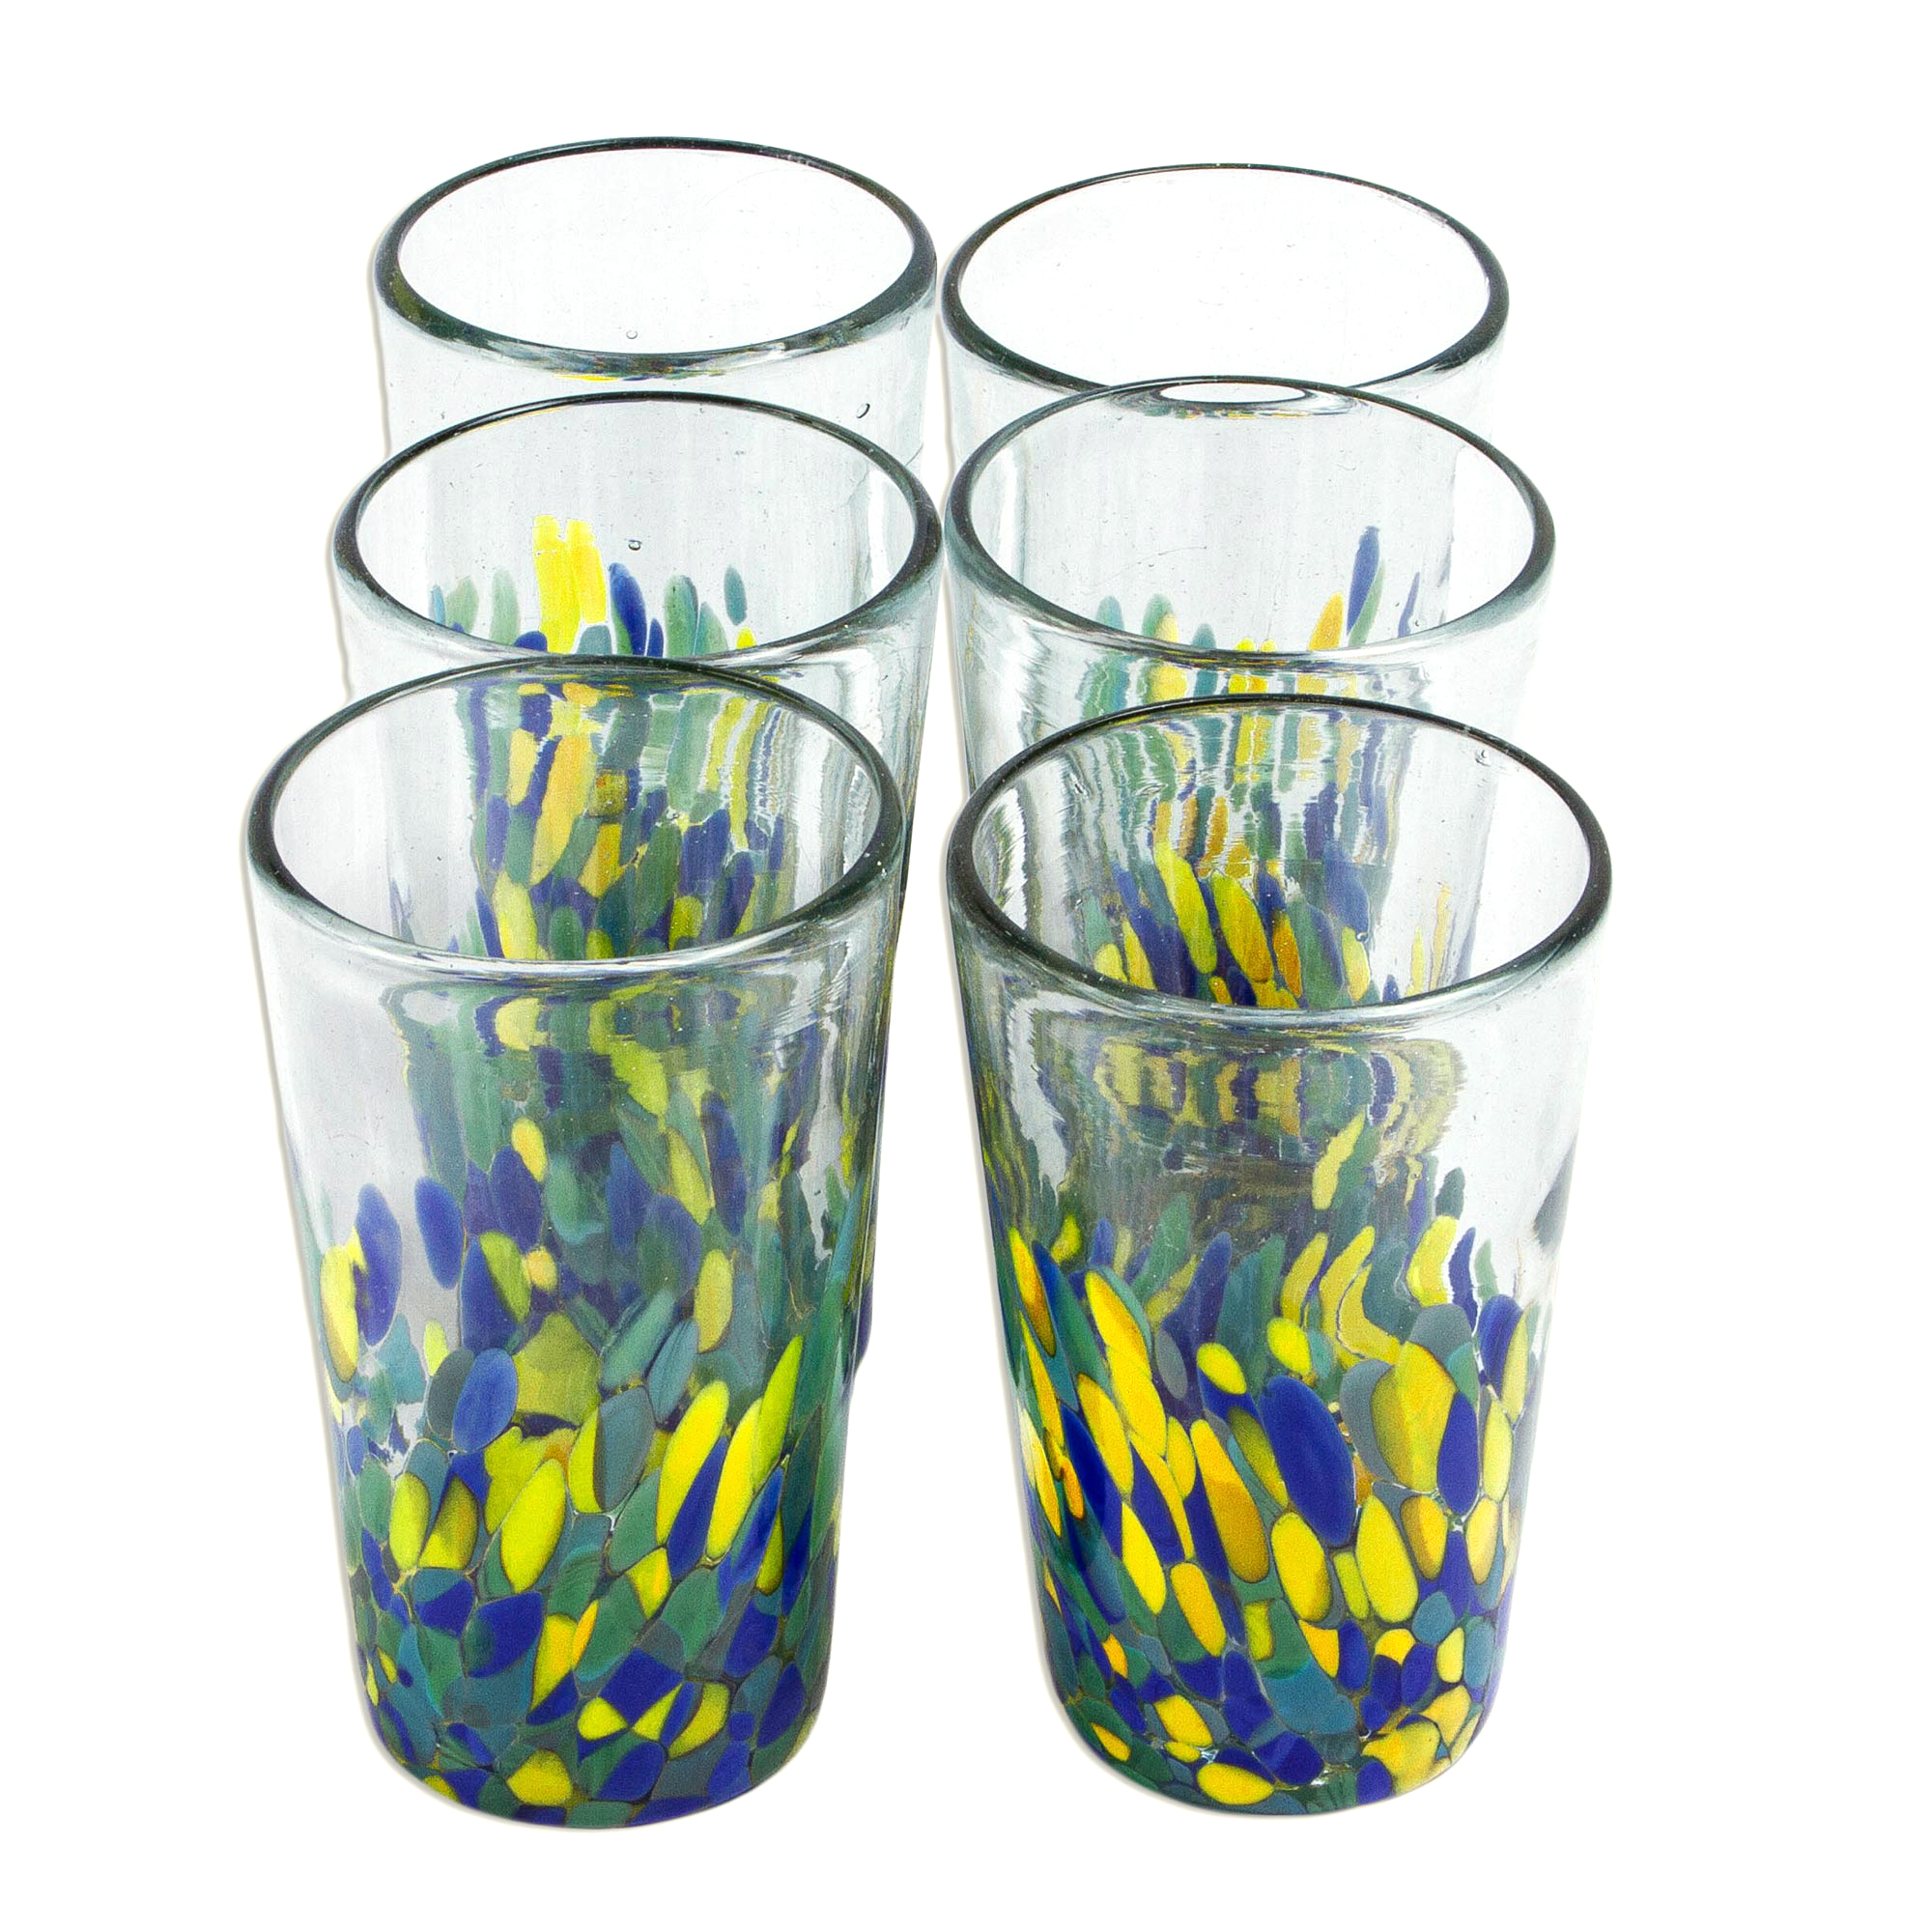 Unicef Market Colorful Recycled Glass Tumblers 16 Oz Set Of 6 Tropical Confetti